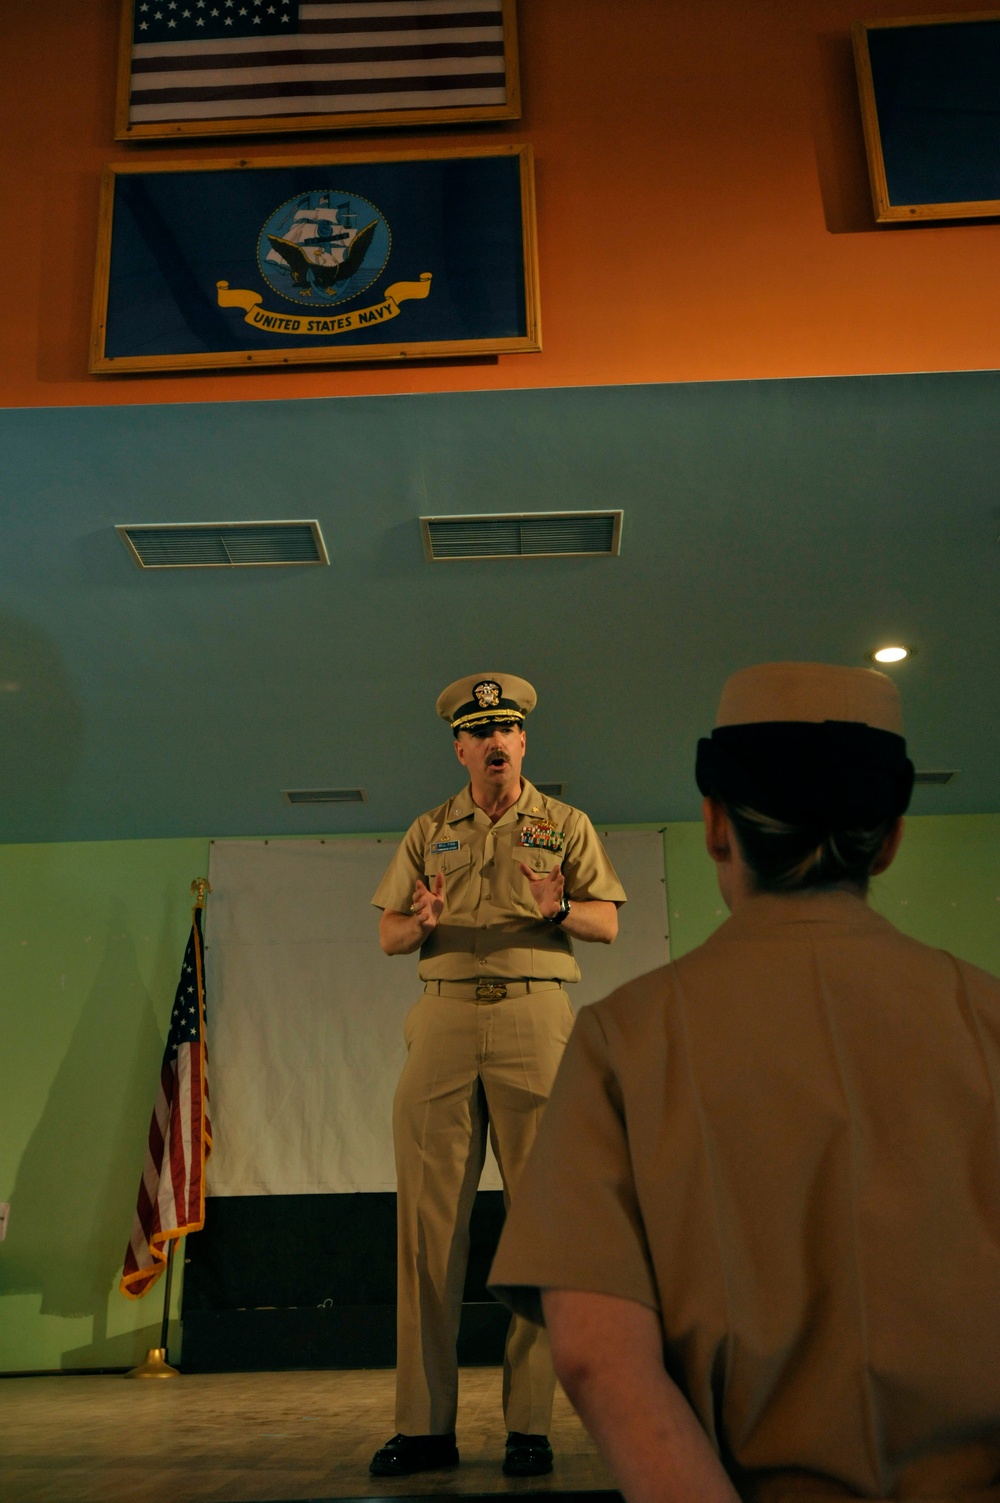 Chief Petty Officer Pinning in Djibouti